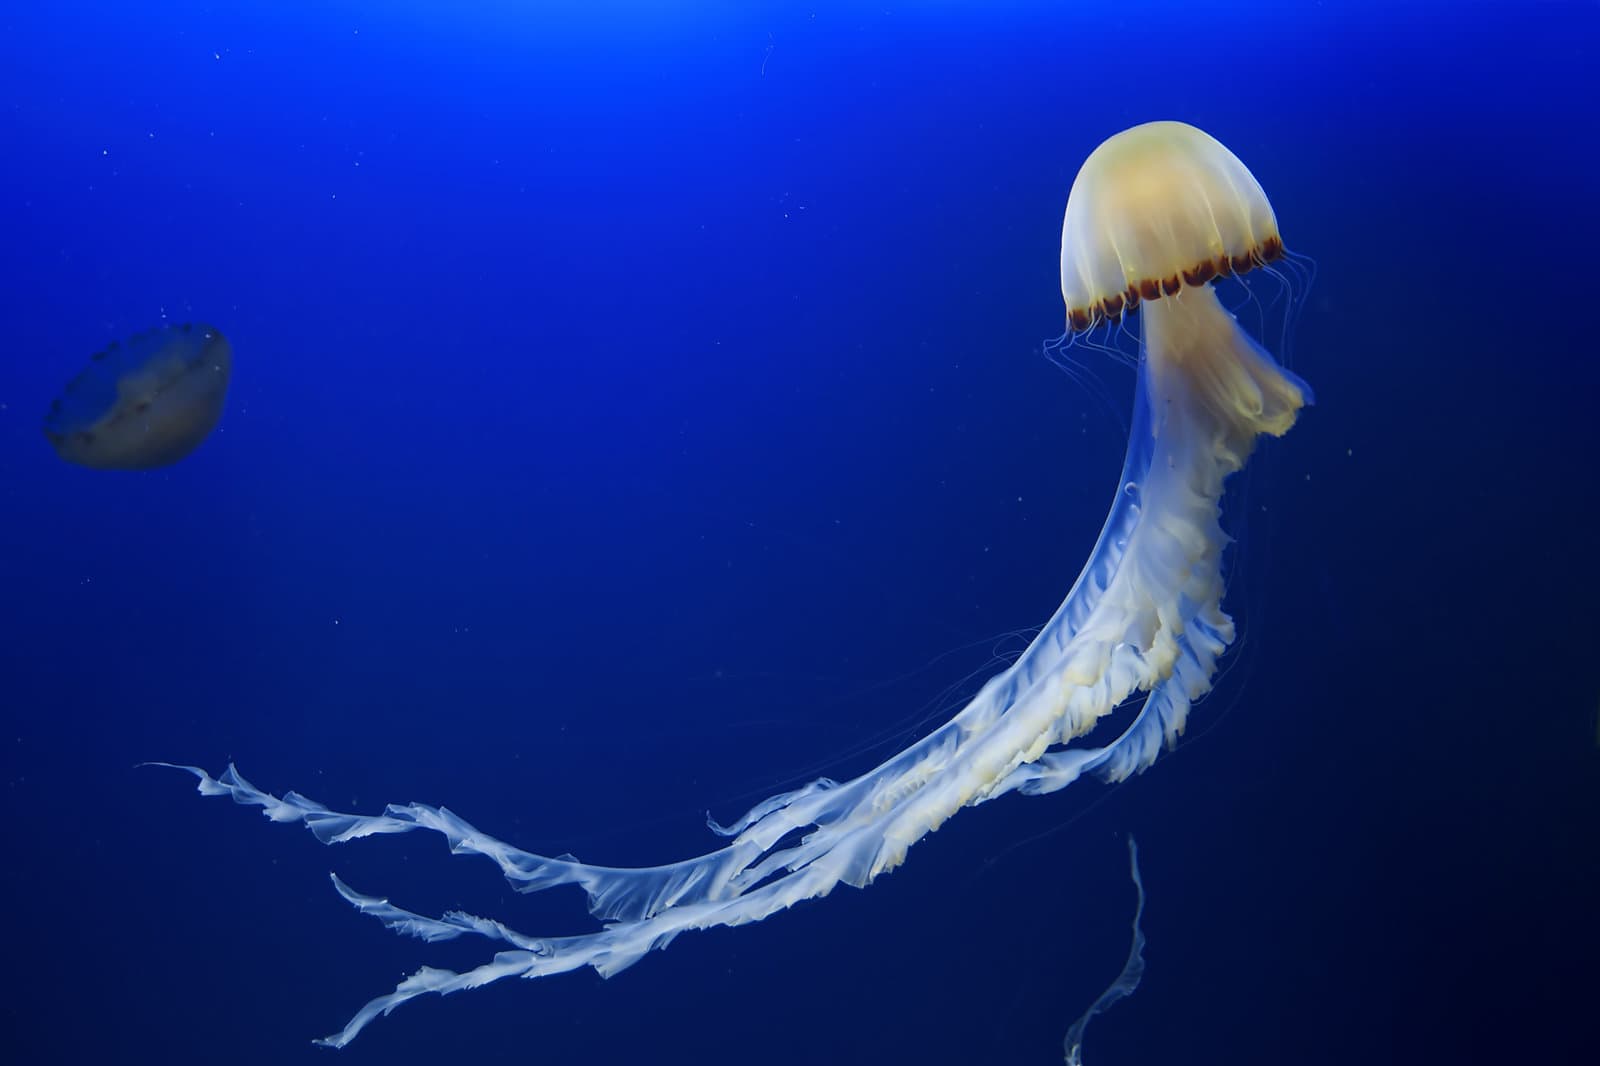 Fun Facts About Jellyfish for Kids